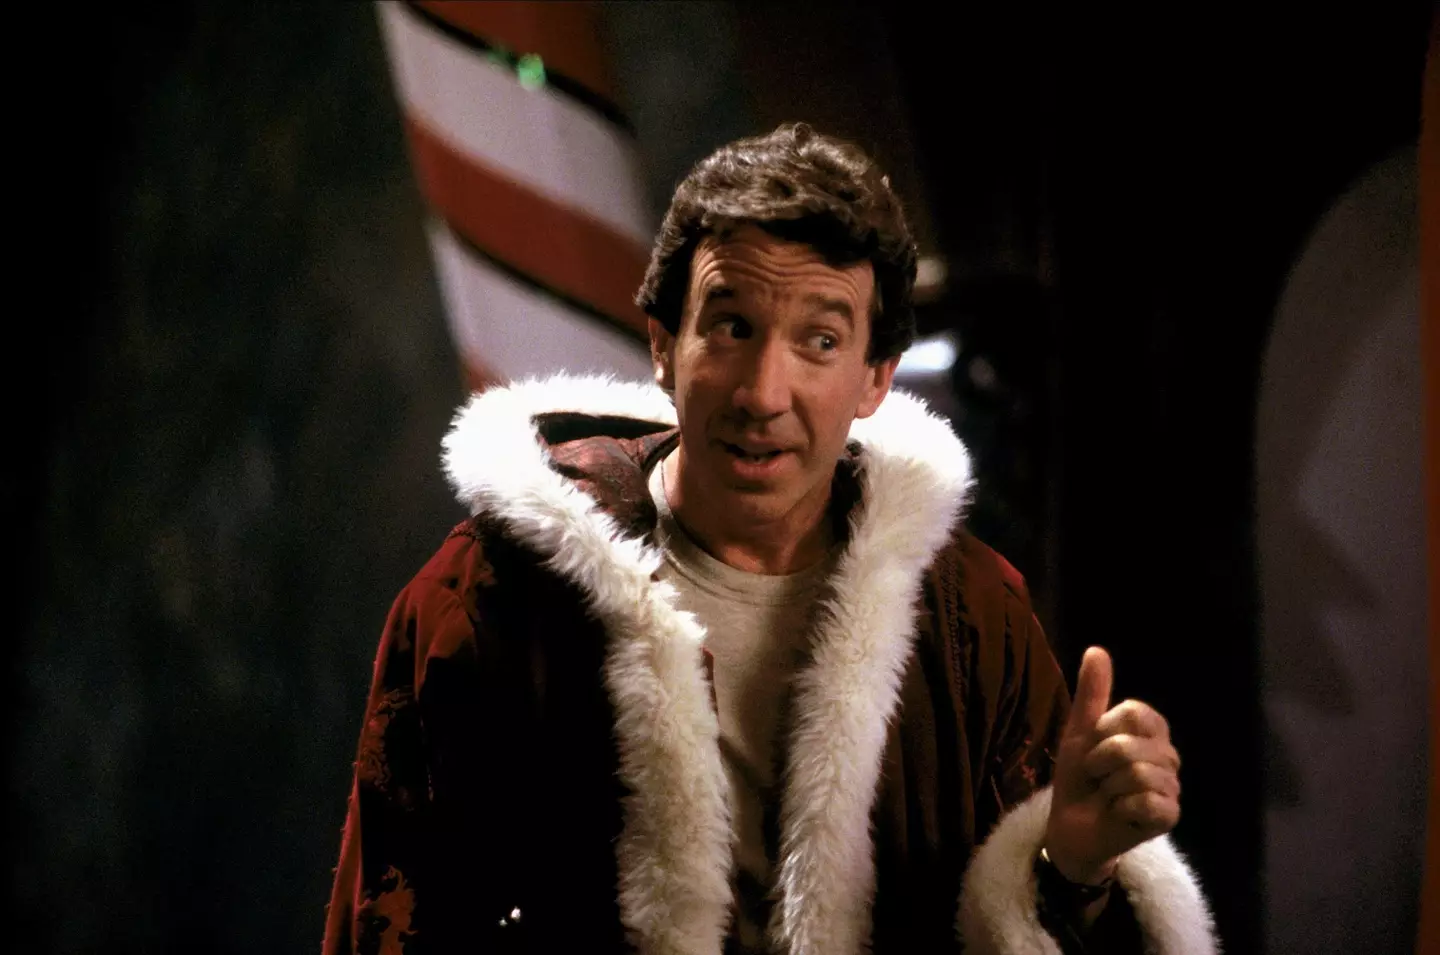 Tim Allen thought The Santa Clause had more than a few plot holes.